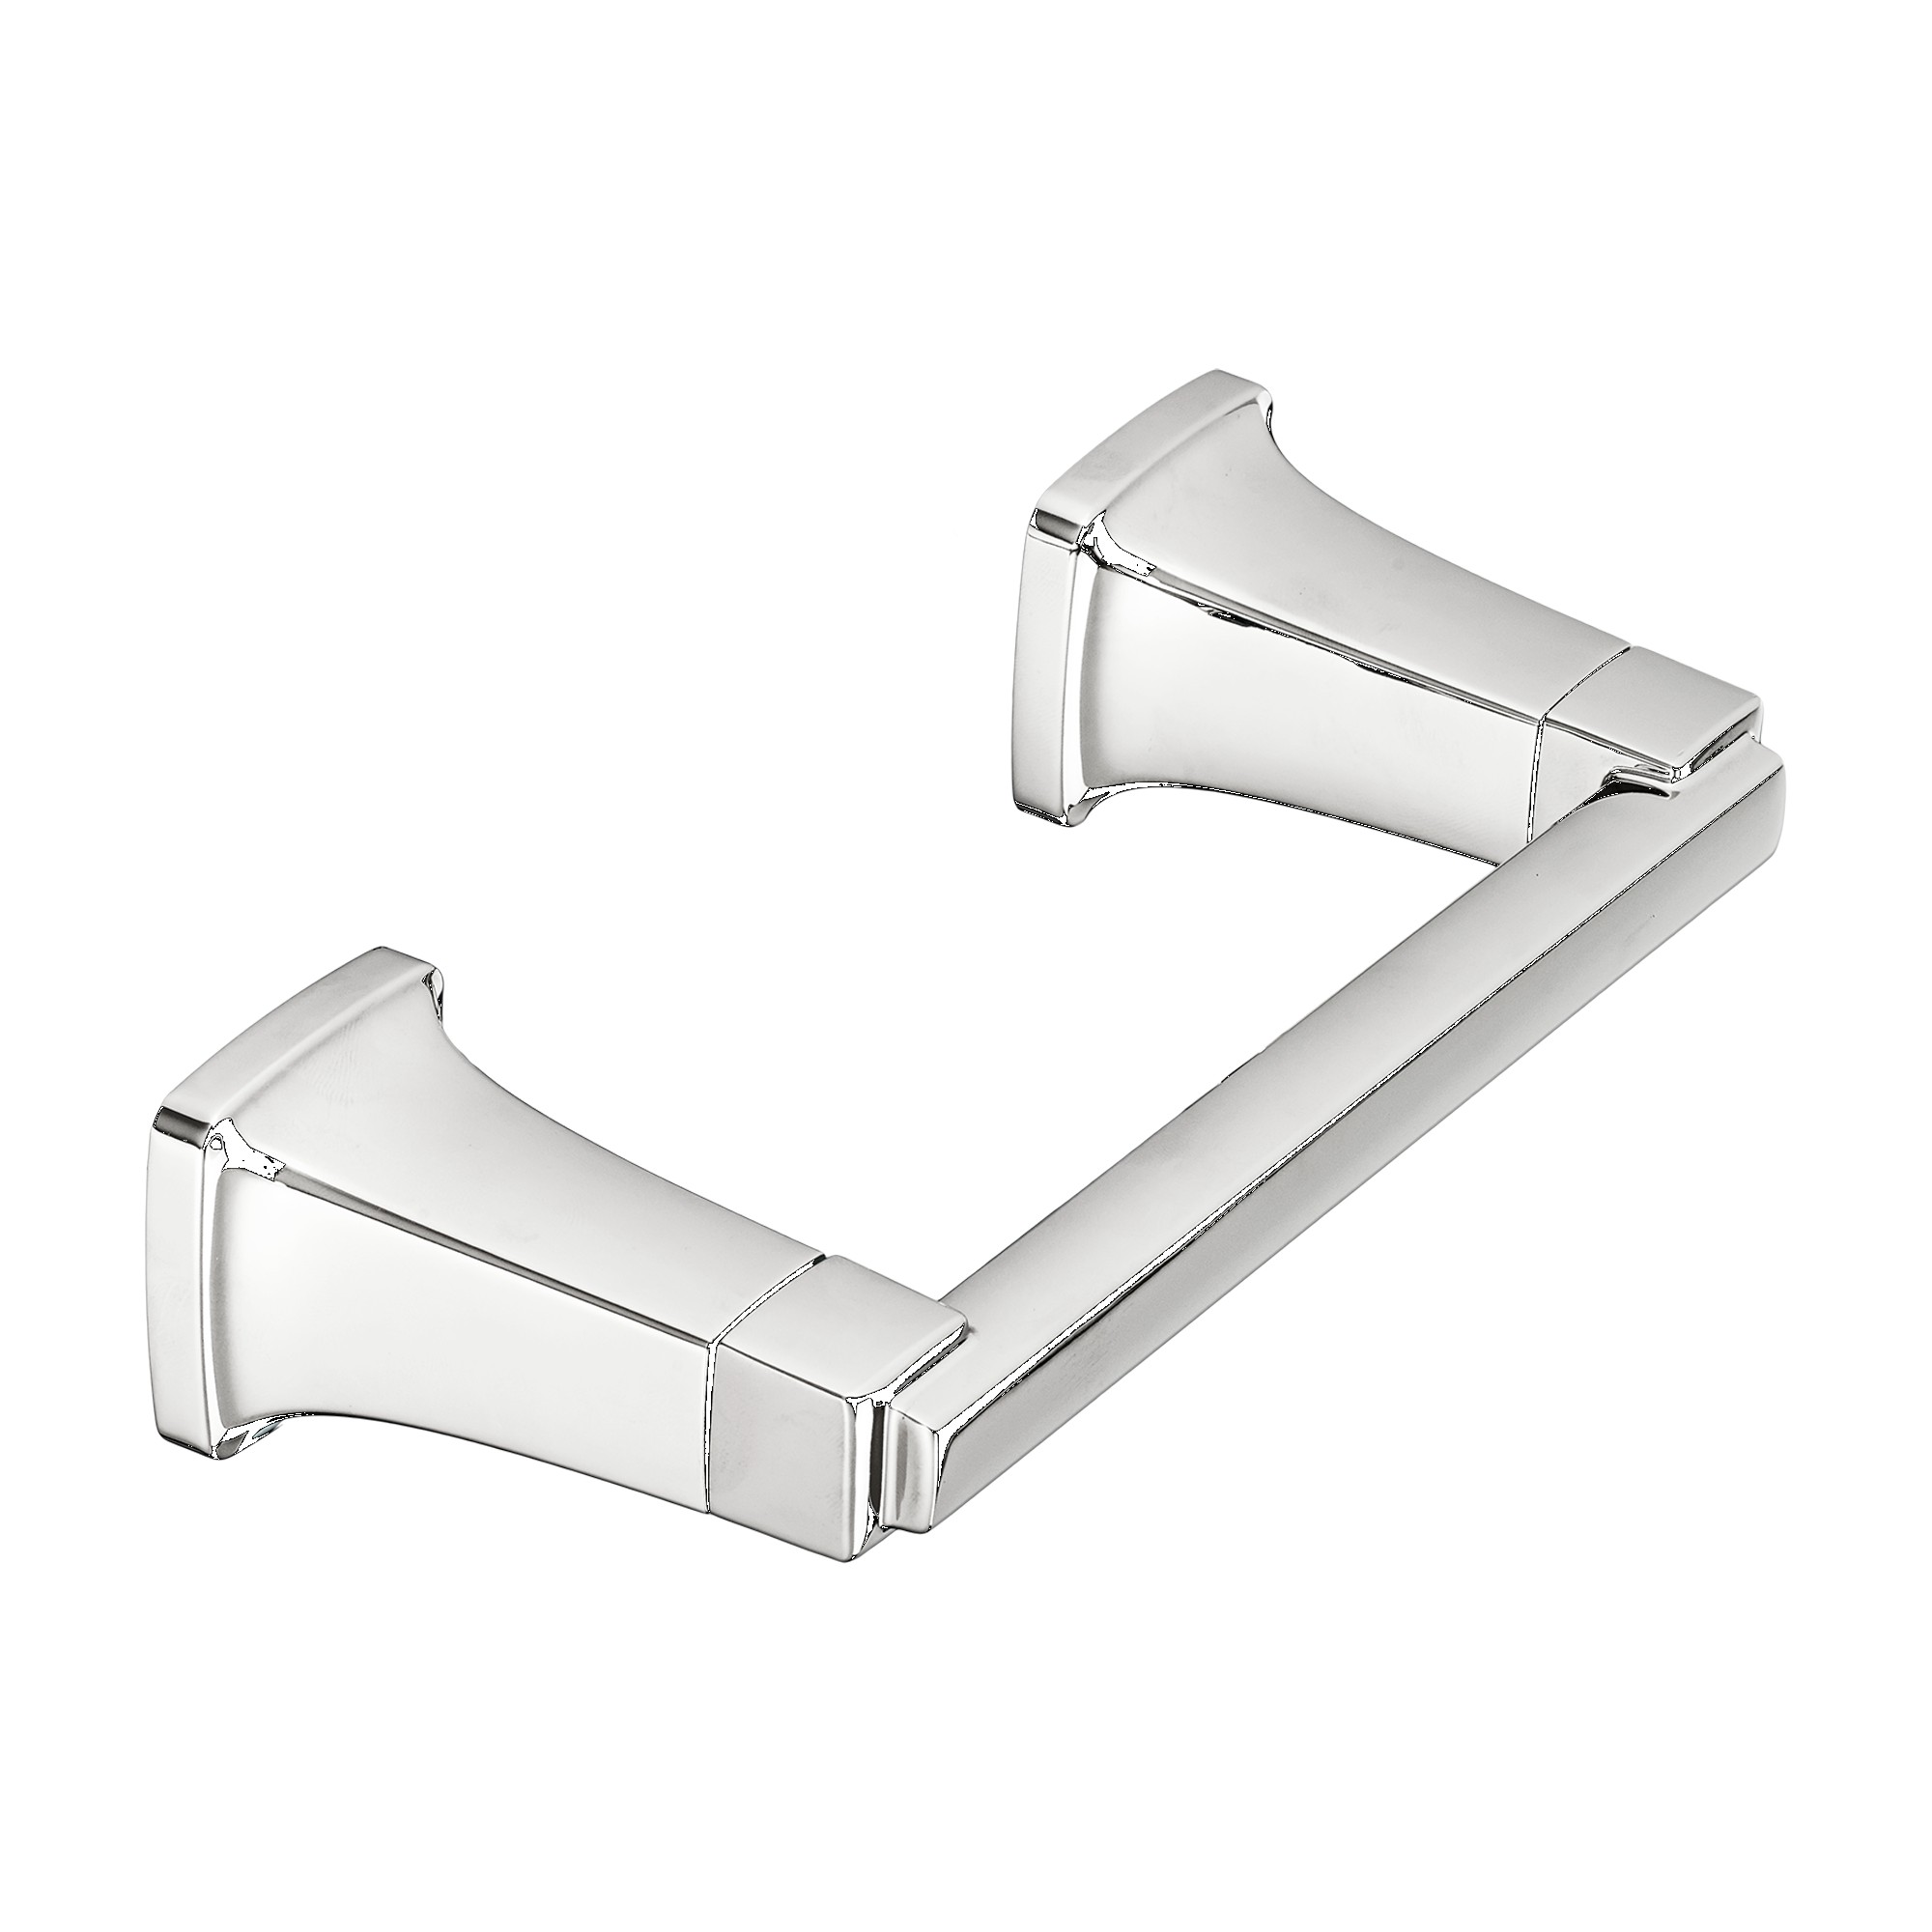 American Standard | 7353.230.002 | AMERICAN STANDARD 7353.230 TOWNSEND TOILET PAPER HOLDER CP 002 POLISHED CHROME